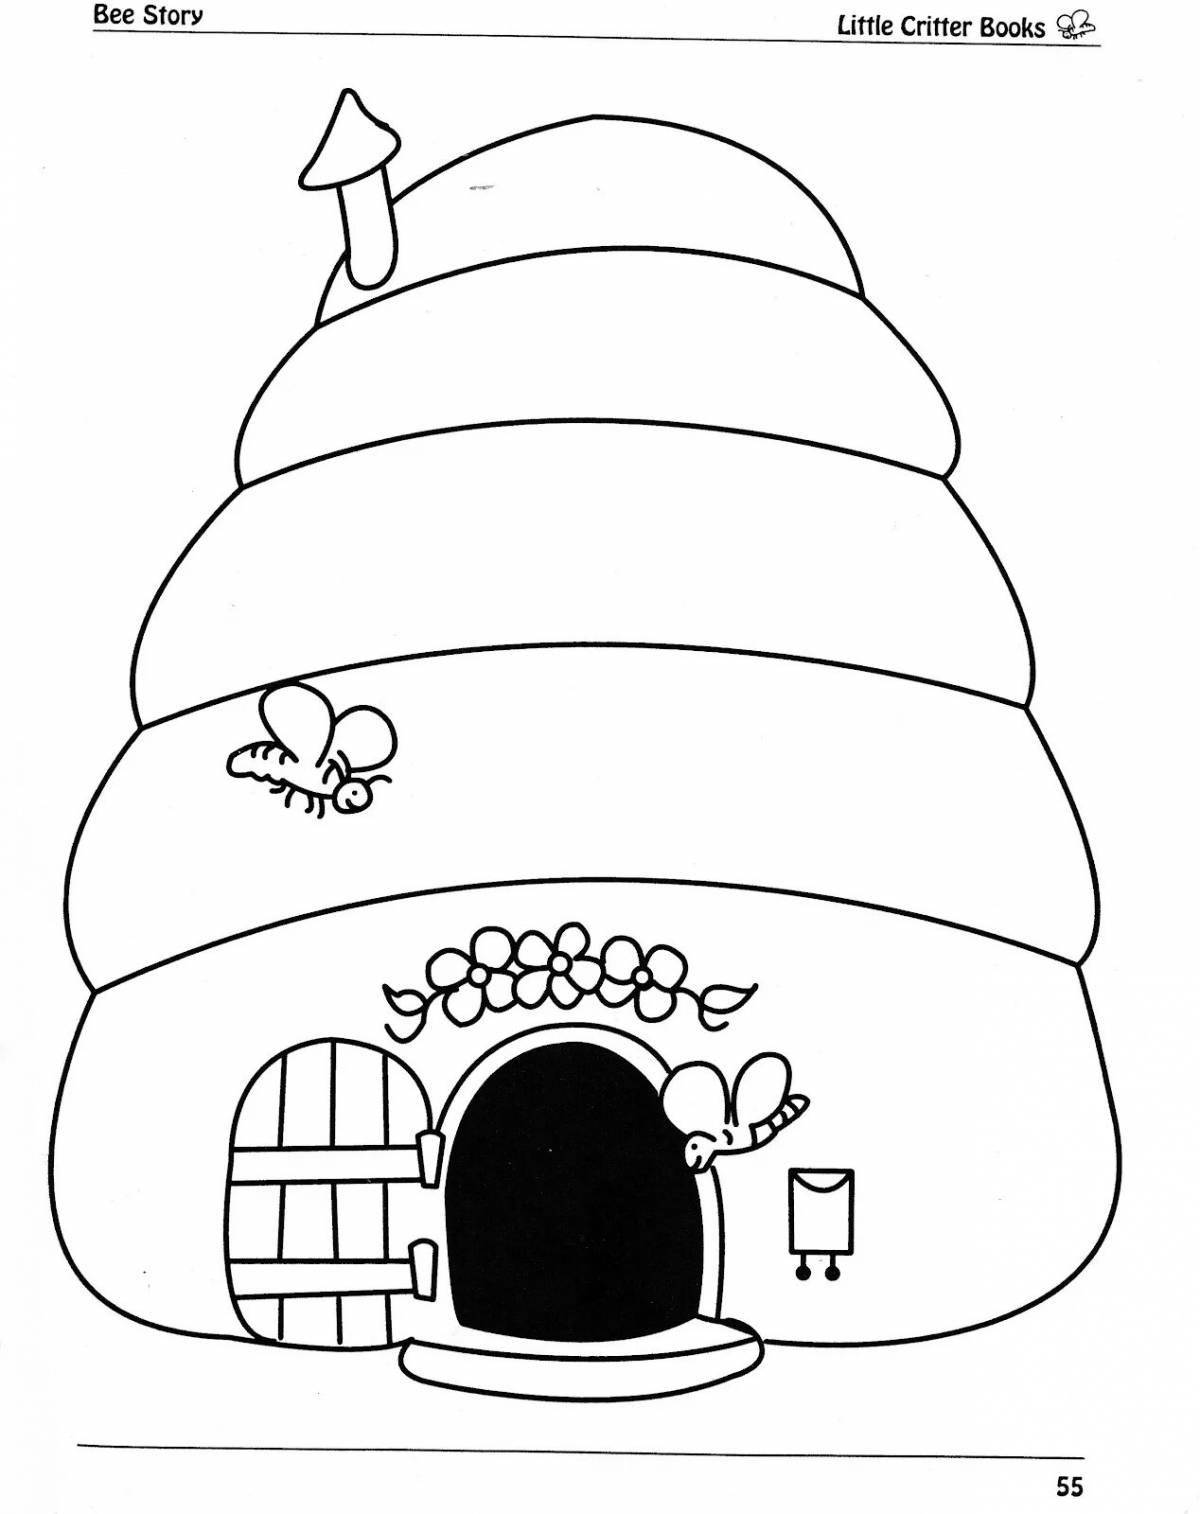 Amazing beehive coloring book for kids